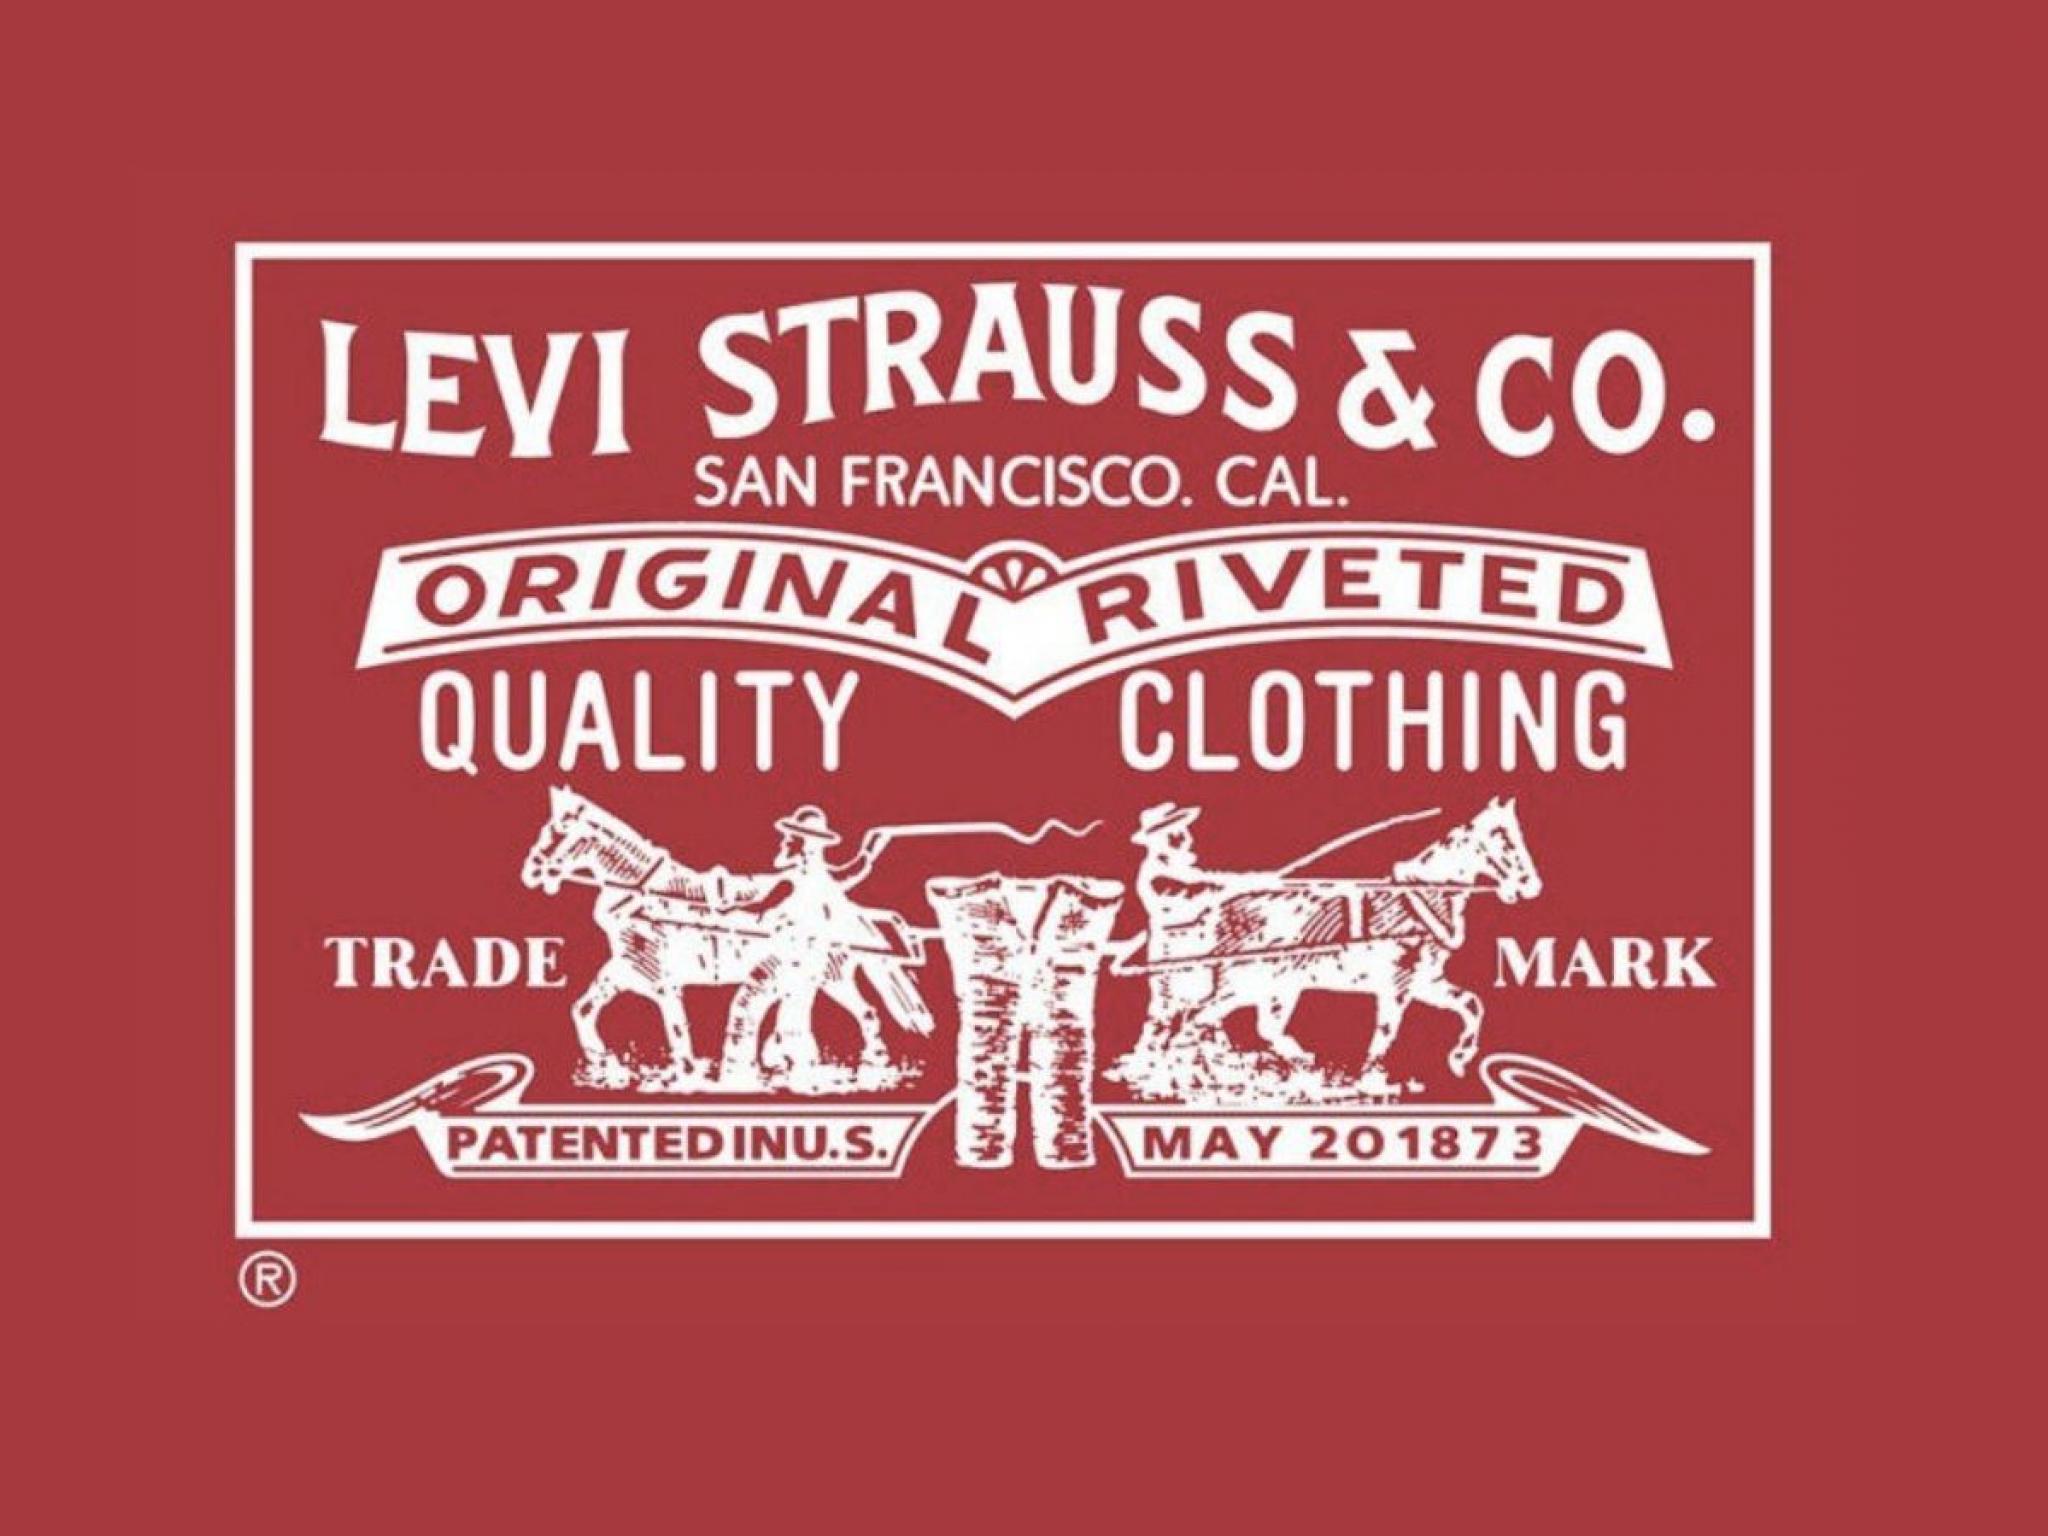  levi-strauss-analysts-boost-their-forecasts-after-upbeat-earnings 